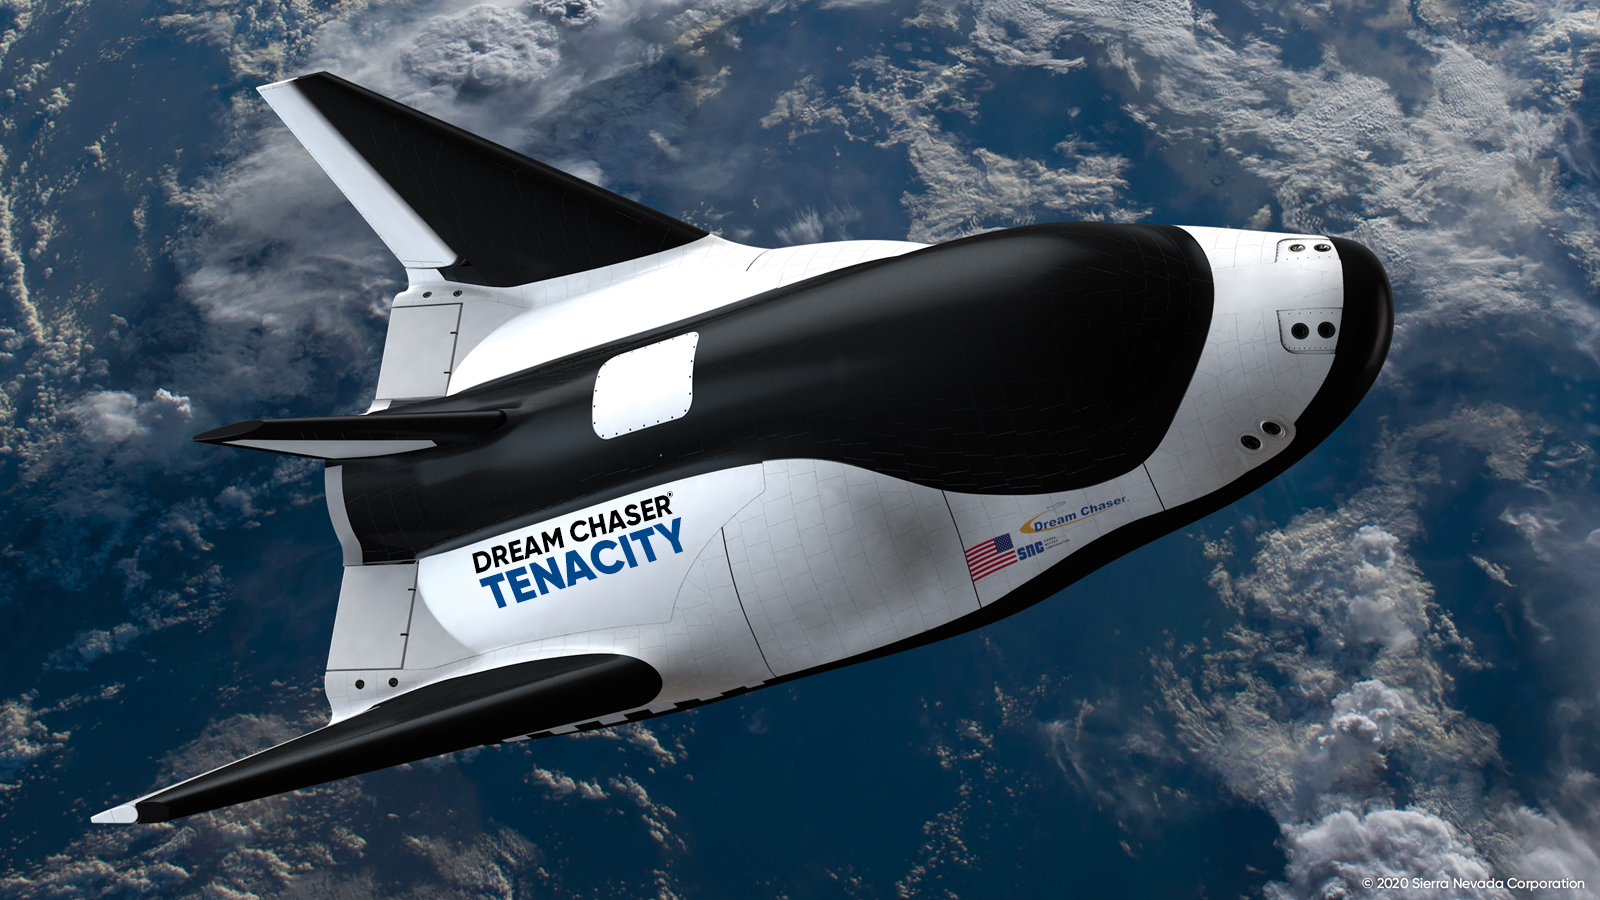 Meet 'Tenacity': 1st Dream Chaser space plane gets a name | Space